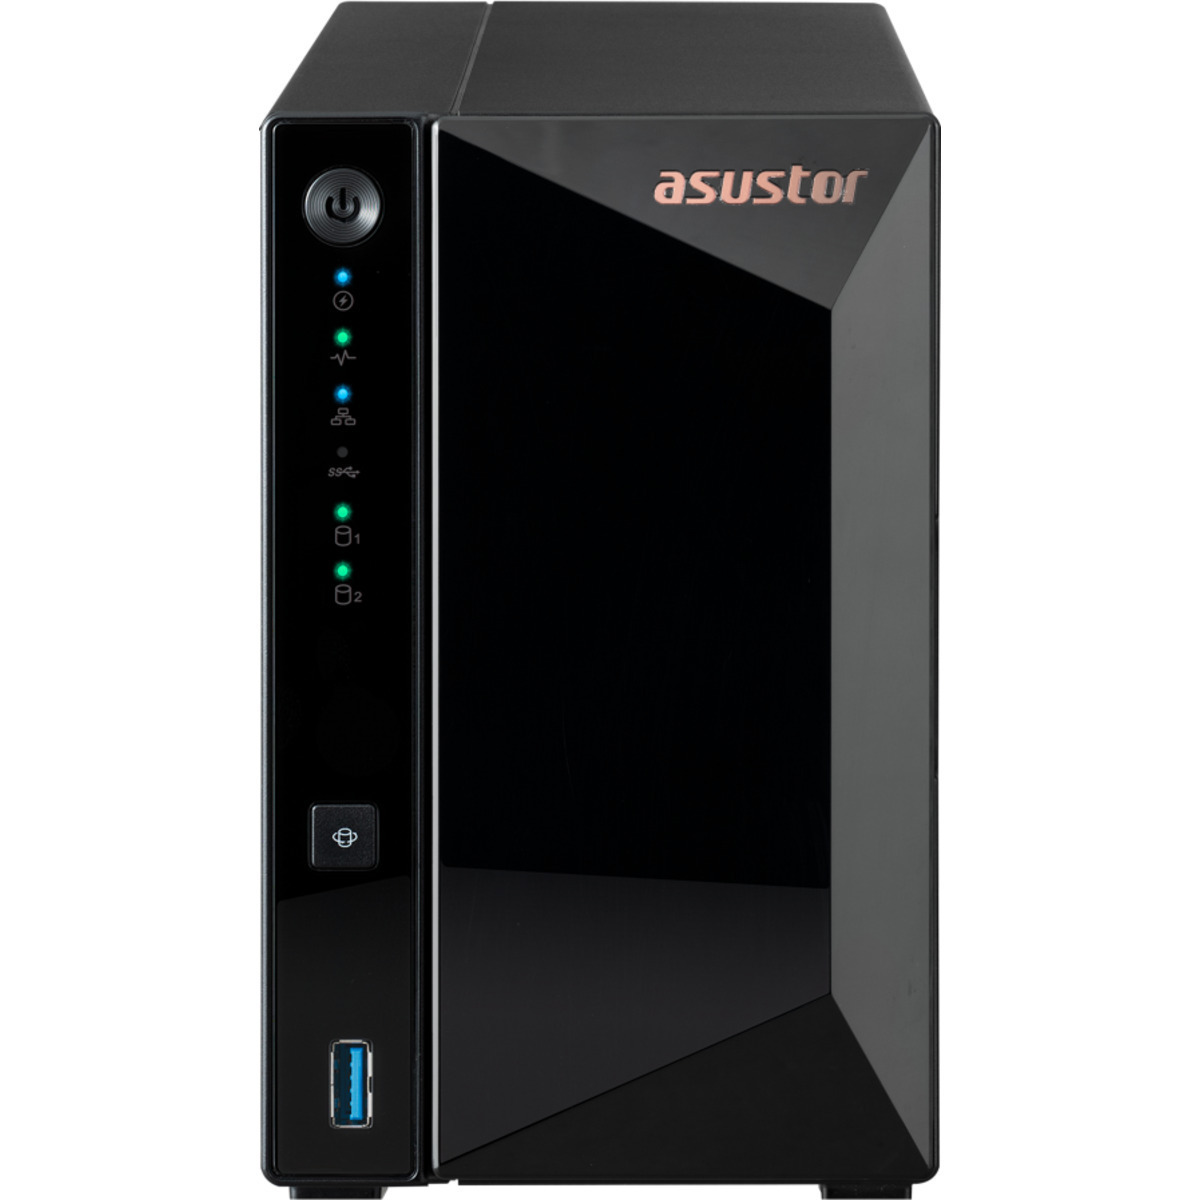 ASUSTOR DRIVESTOR 2 Pro Gen2 AS3302T v2 4tb 2-Bay Desktop Personal / Basic Home / Small Office NAS - Network Attached Storage Device 2x2tb Samsung 870 EVO MZ-77E2T0BAM 2.5 560/530MB/s SATA 6Gb/s SSD CONSUMER Class Drives Installed - Burn-In Tested - ON SALE DRIVESTOR 2 Pro Gen2 AS3302T v2